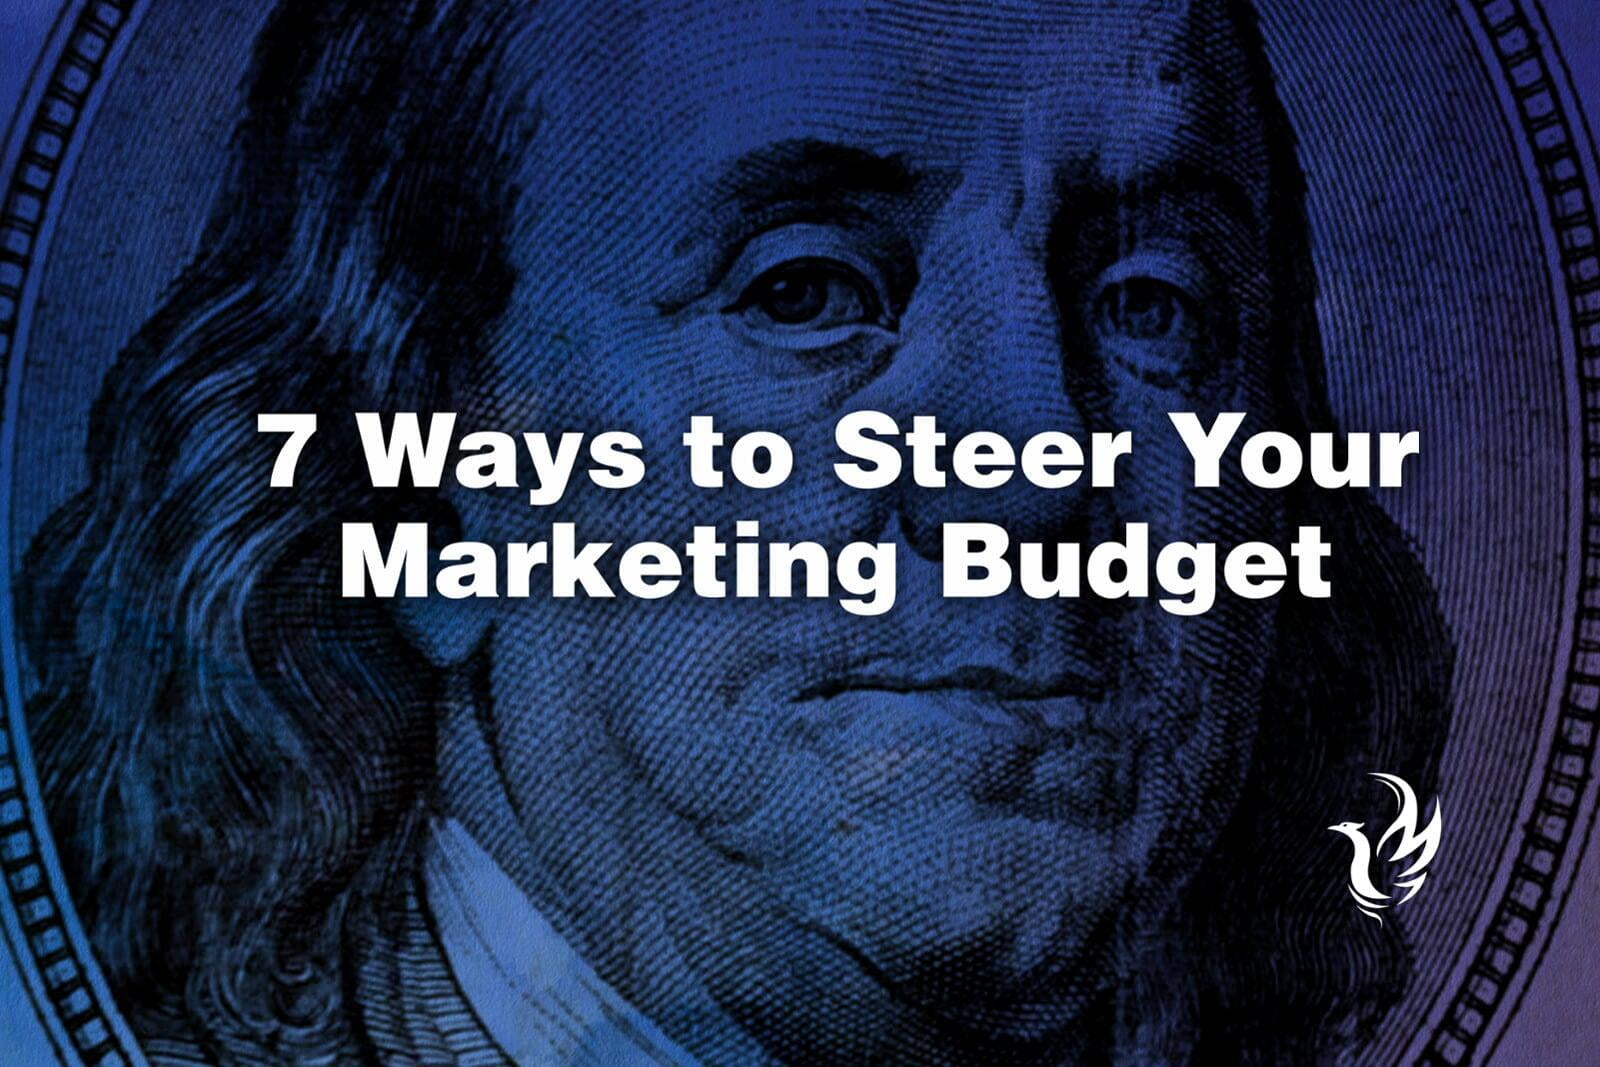 7 Smart Ways to Steer Your Marketing Budget in 2021